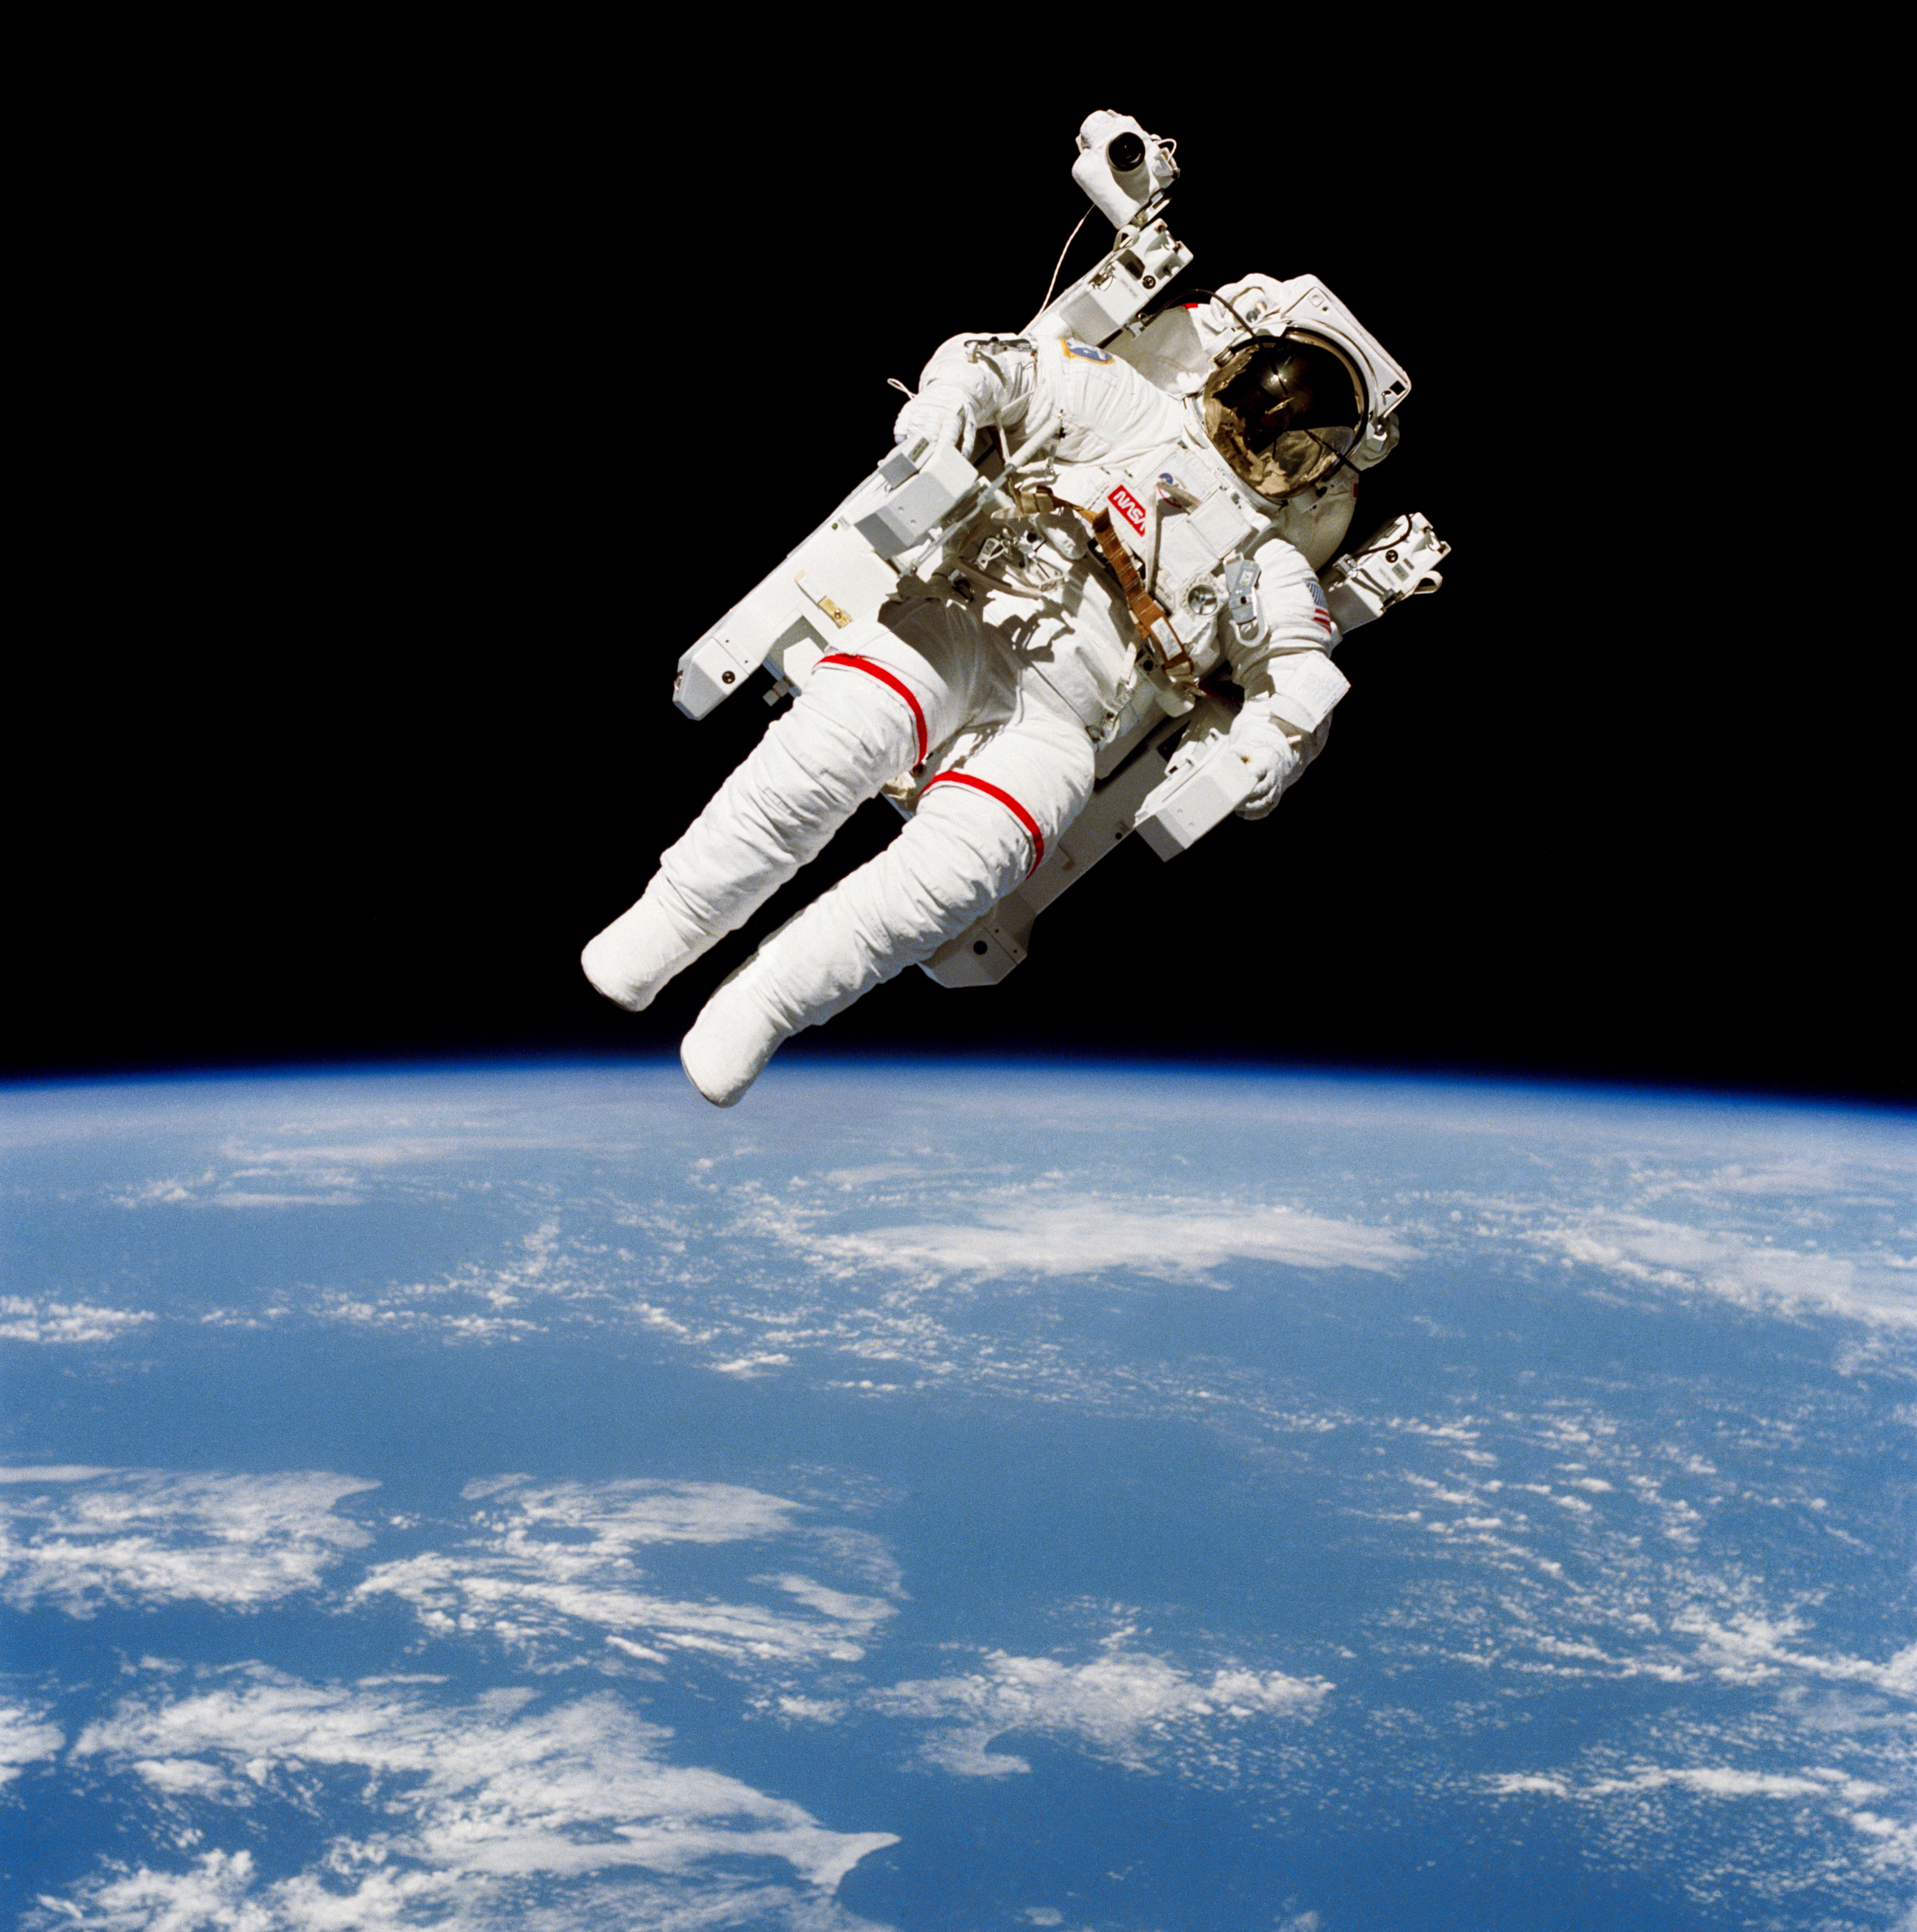 View of Bruce McCandless during the first test flight of the Manned Maneuvering Unit